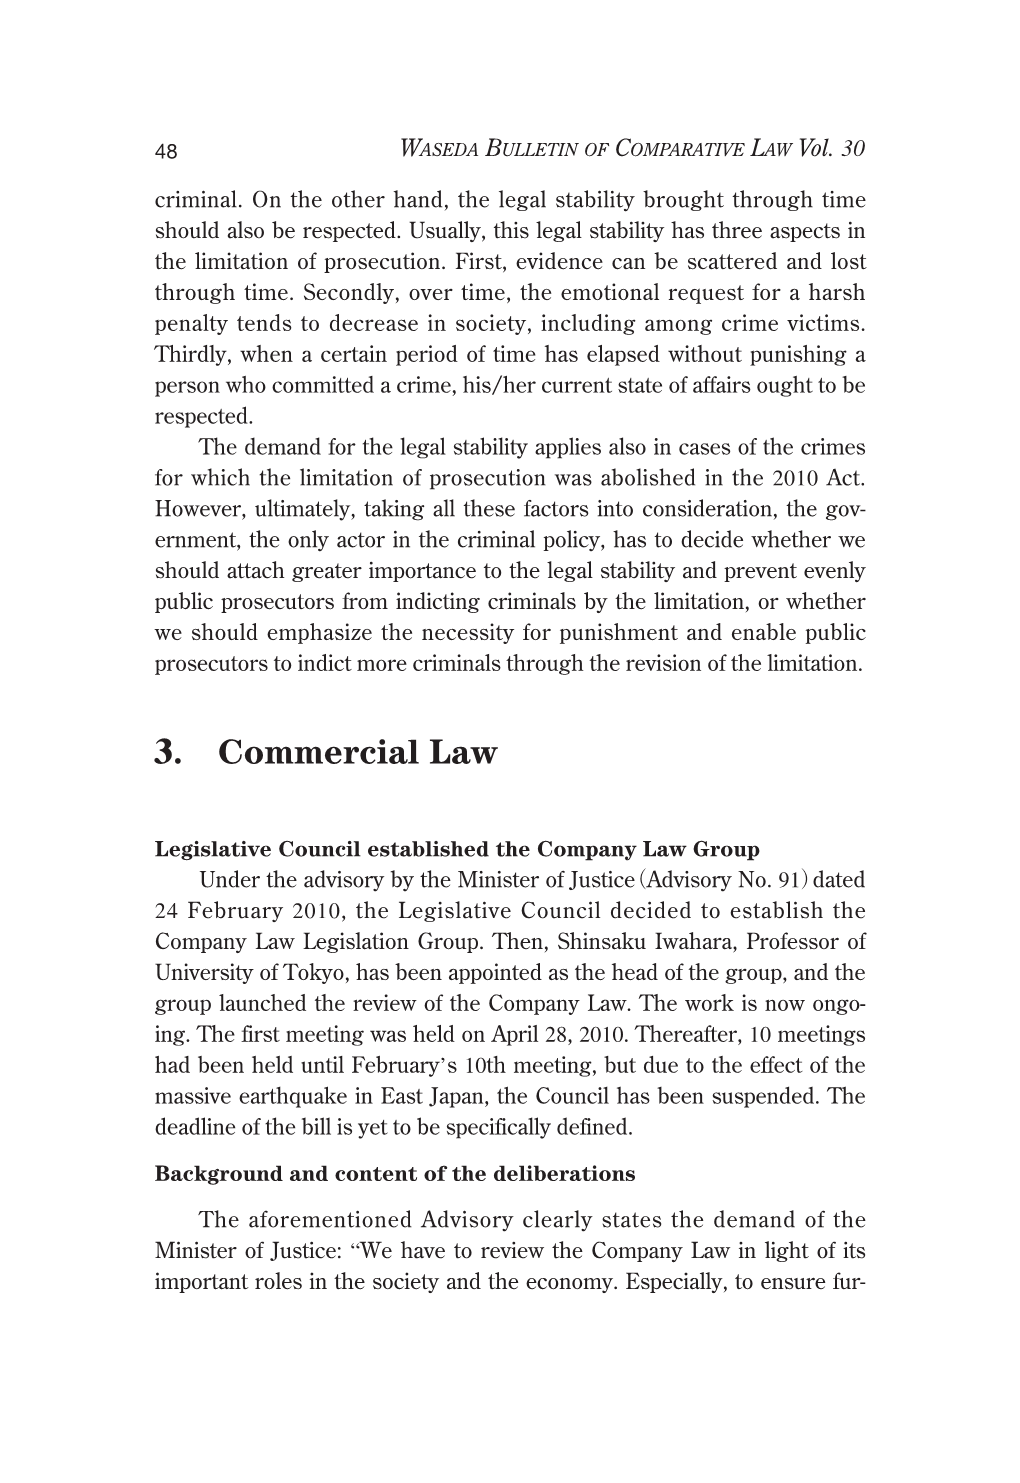 3. Commercial Law